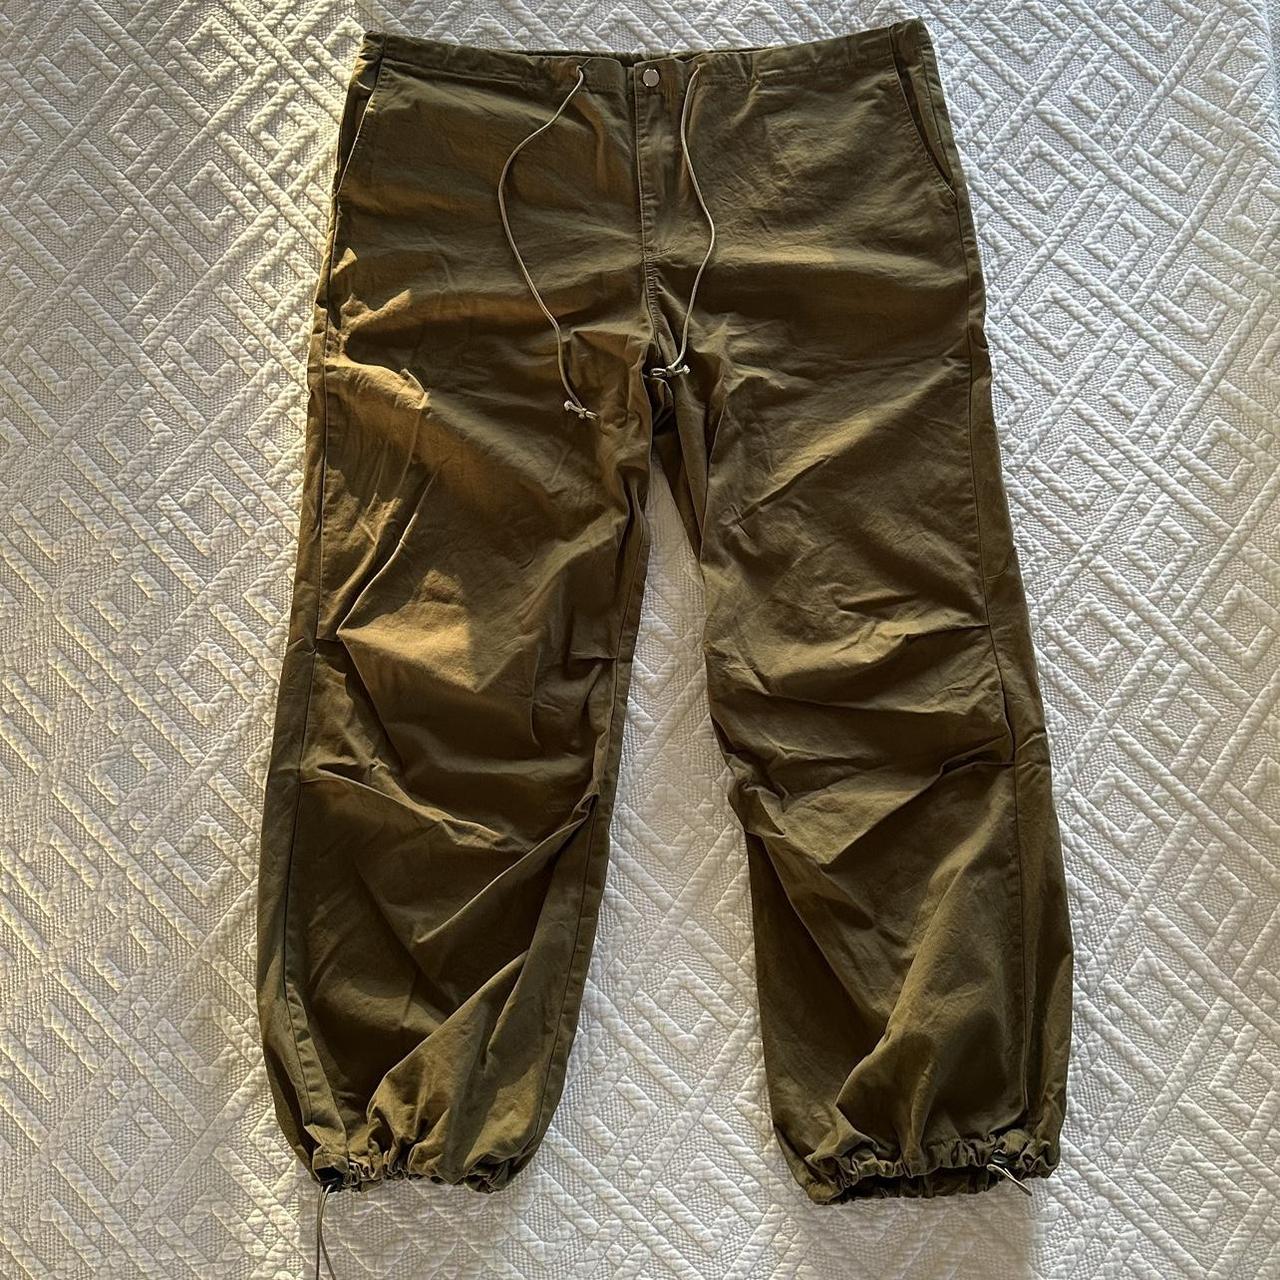 Parachute Pants In a Military Green Colour!! In... - Depop